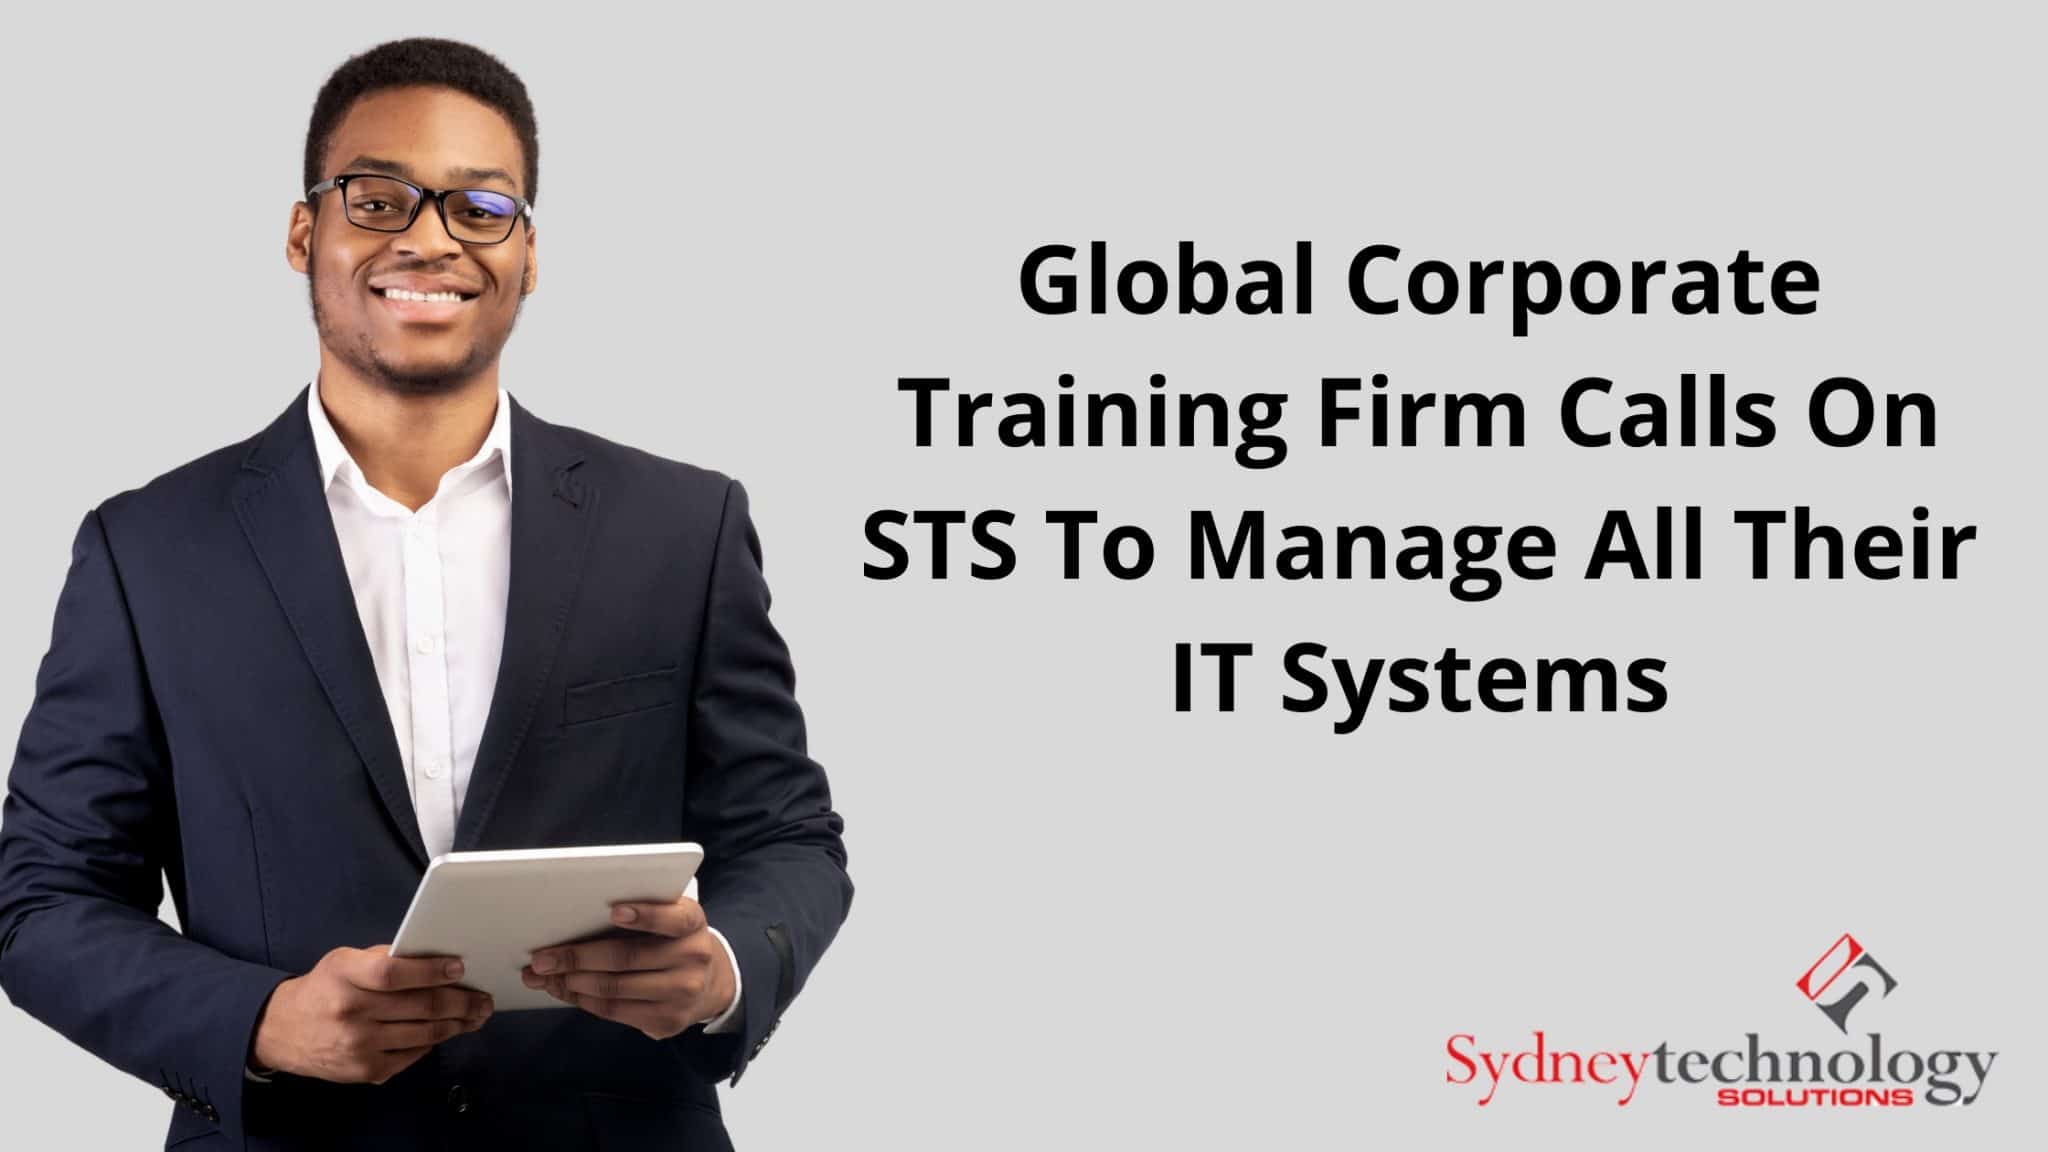 Global Corporate Training Firm Calls On STS To Manage All Their IT Systems